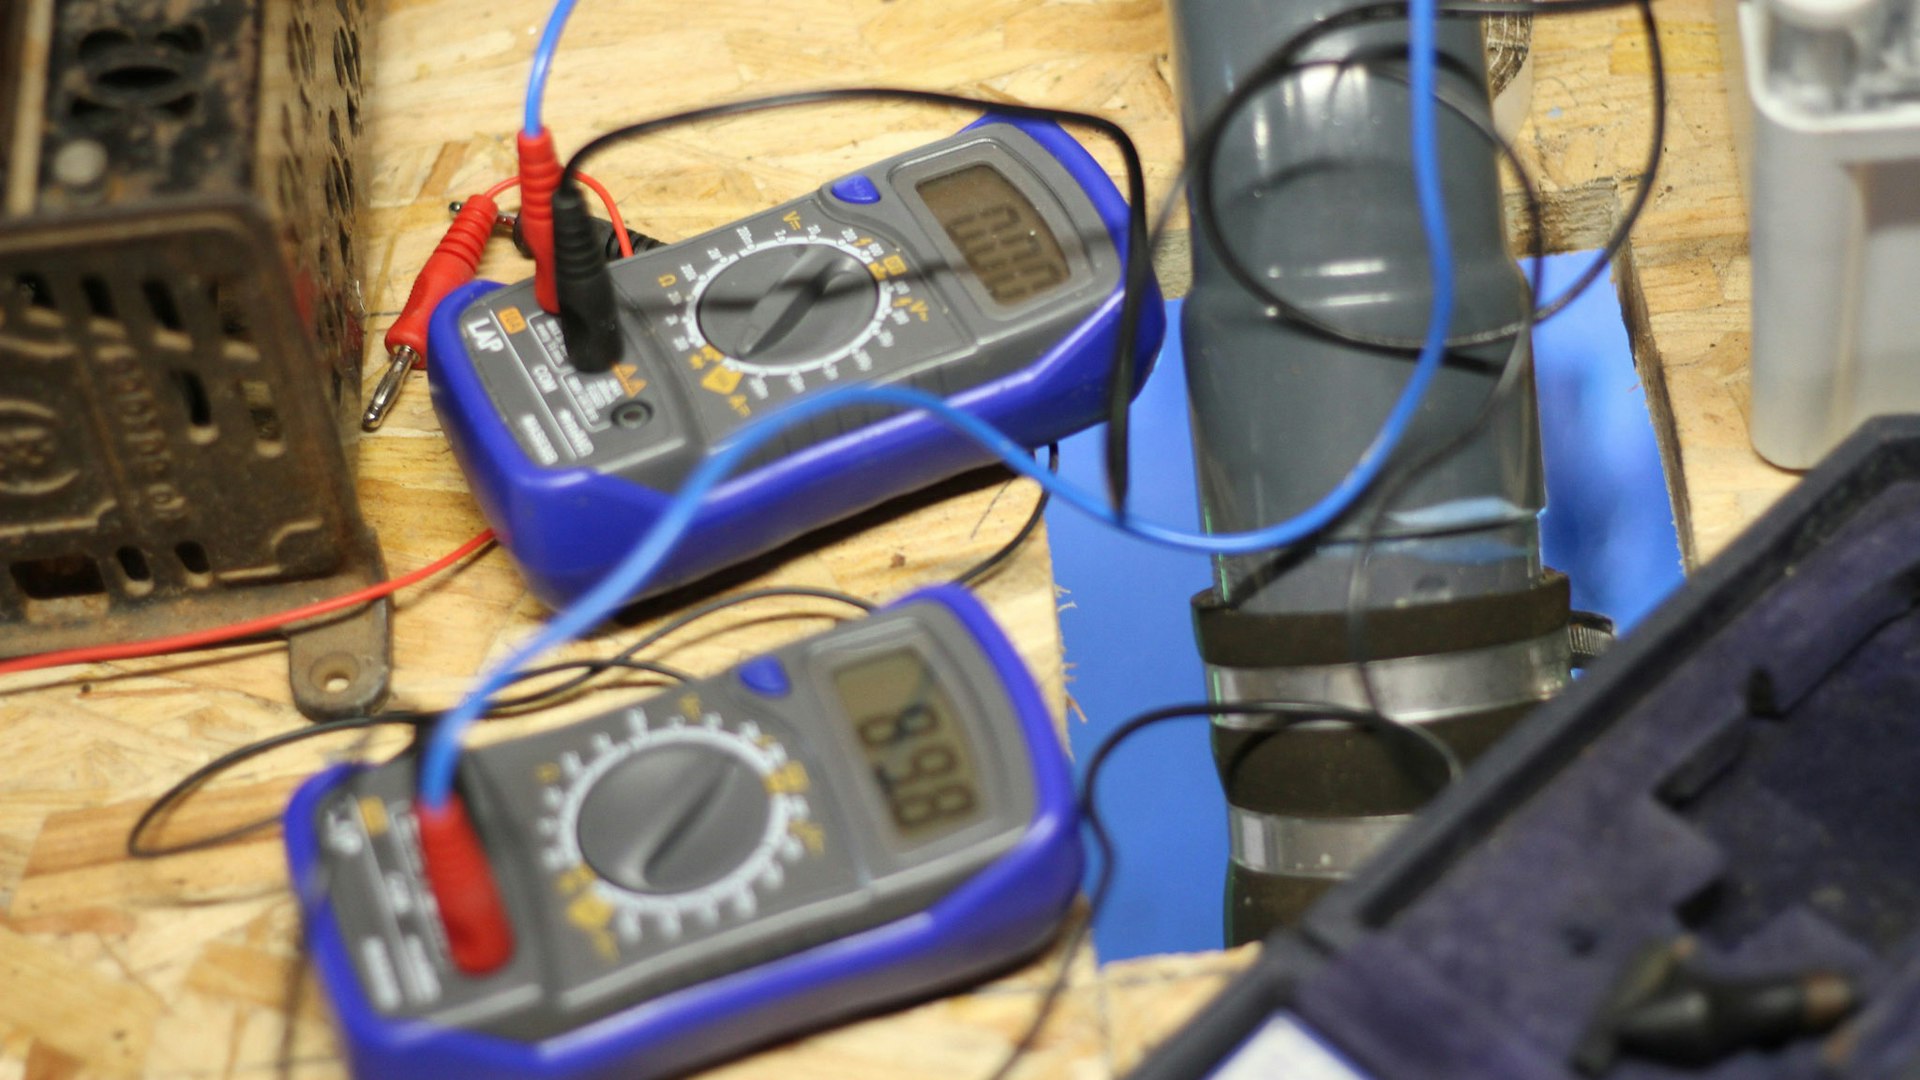 Multimeters reading current and voltage